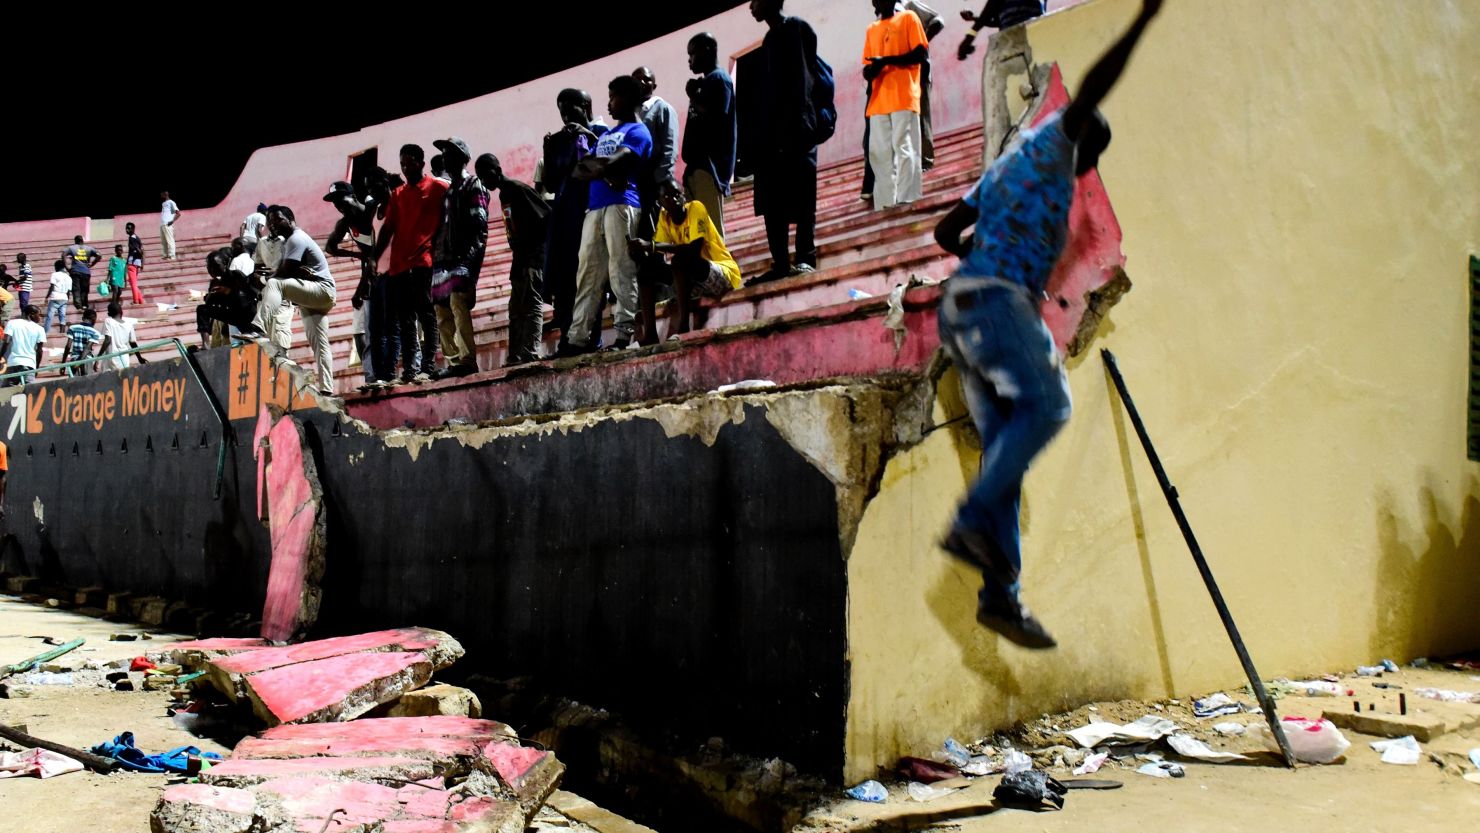 A wall collapsed at Demba Diop Stadium in Dakar after clashes broke out between football fans.